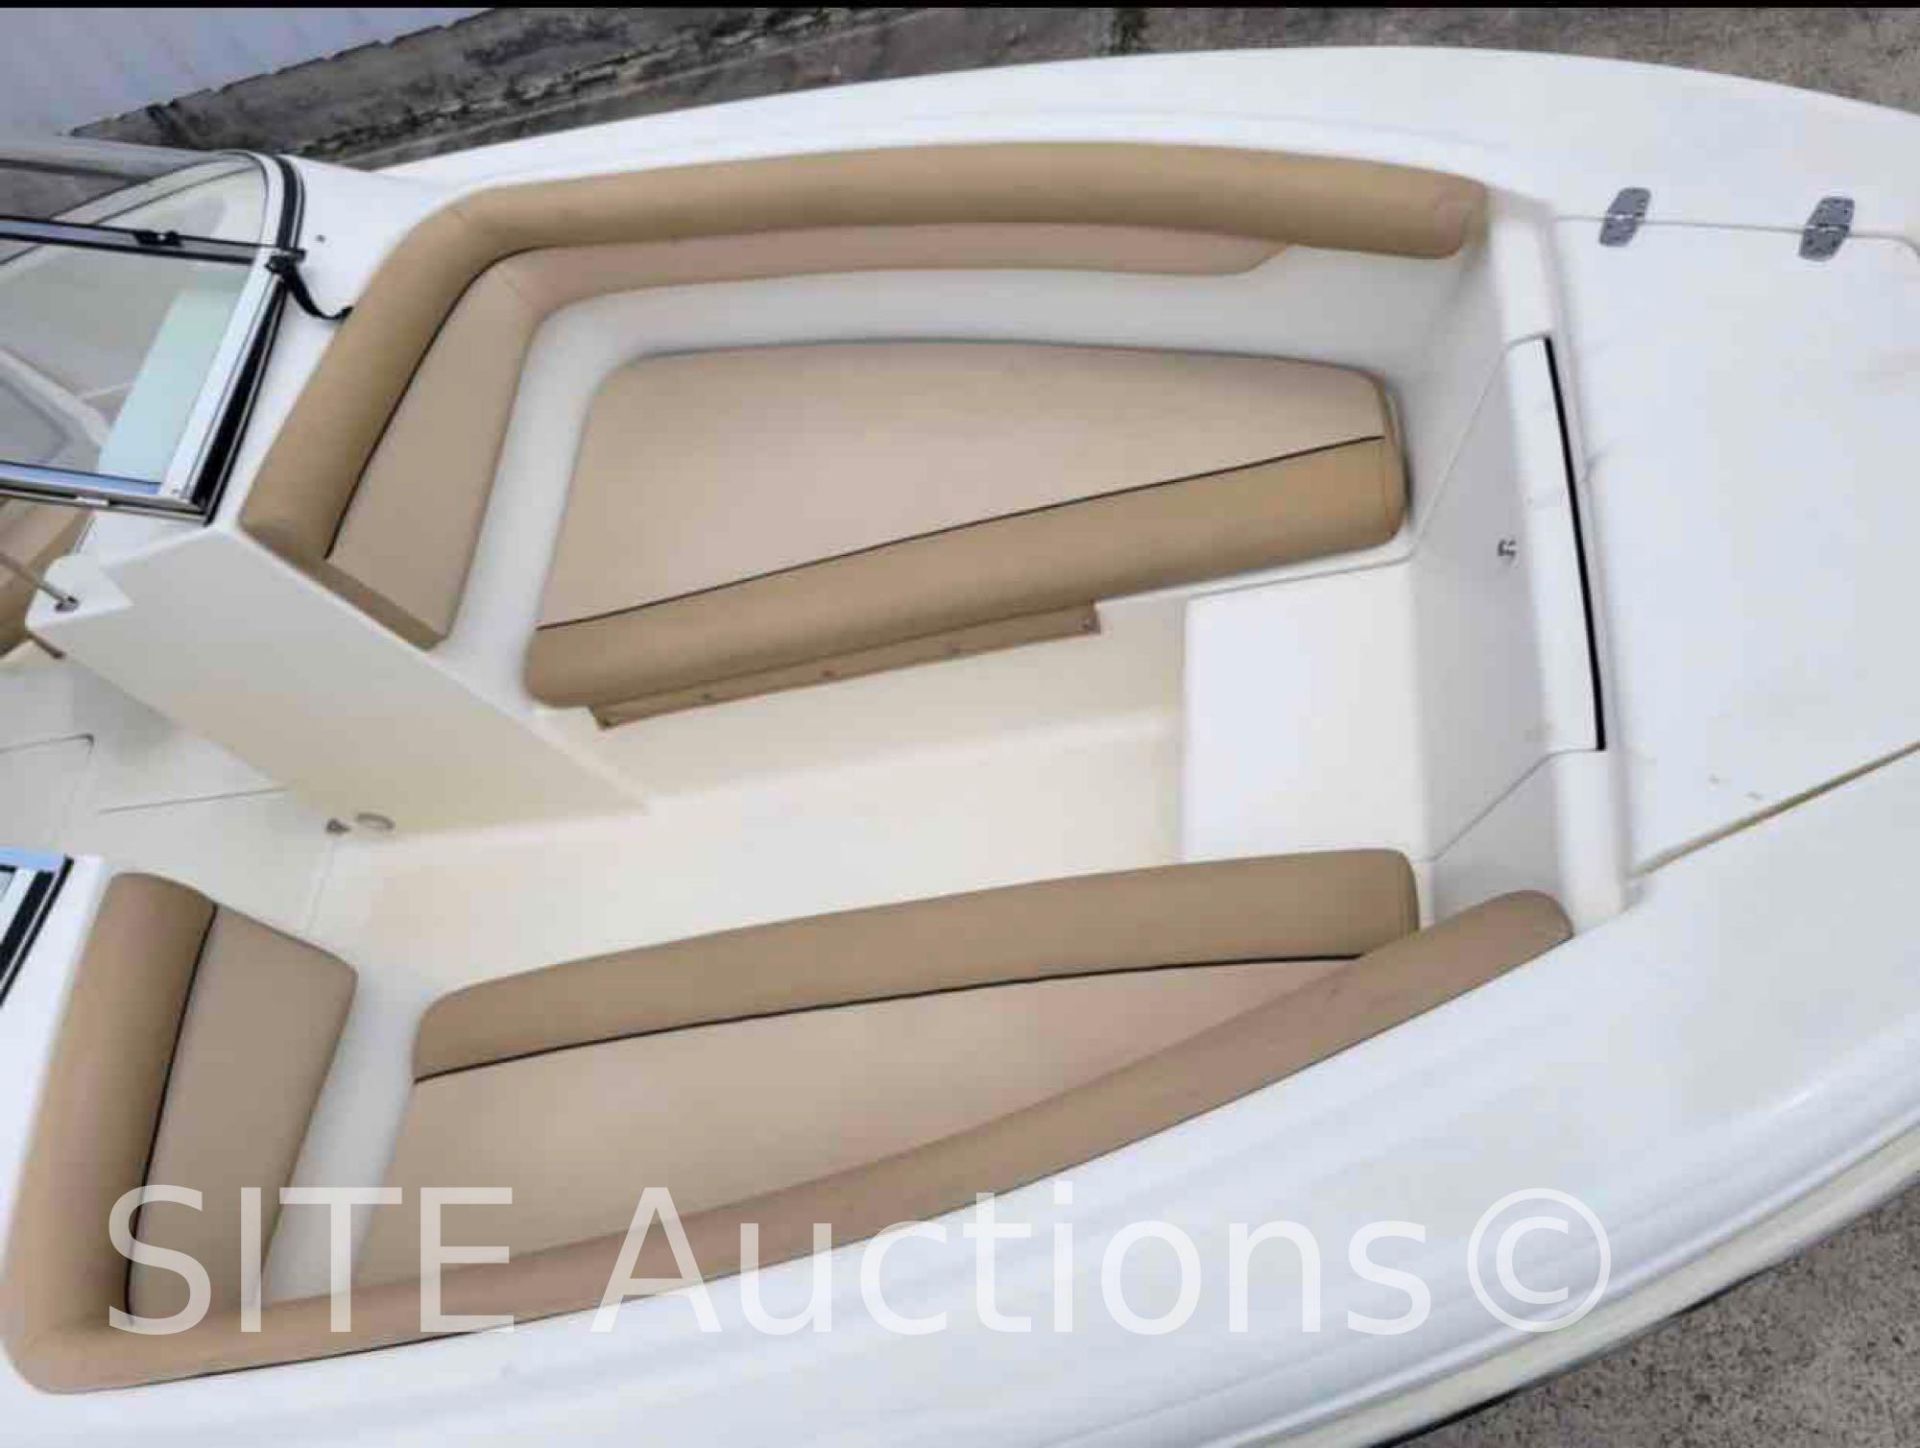 2020 Scout Dorado 20ft. Boat with Trailer - Image 15 of 21